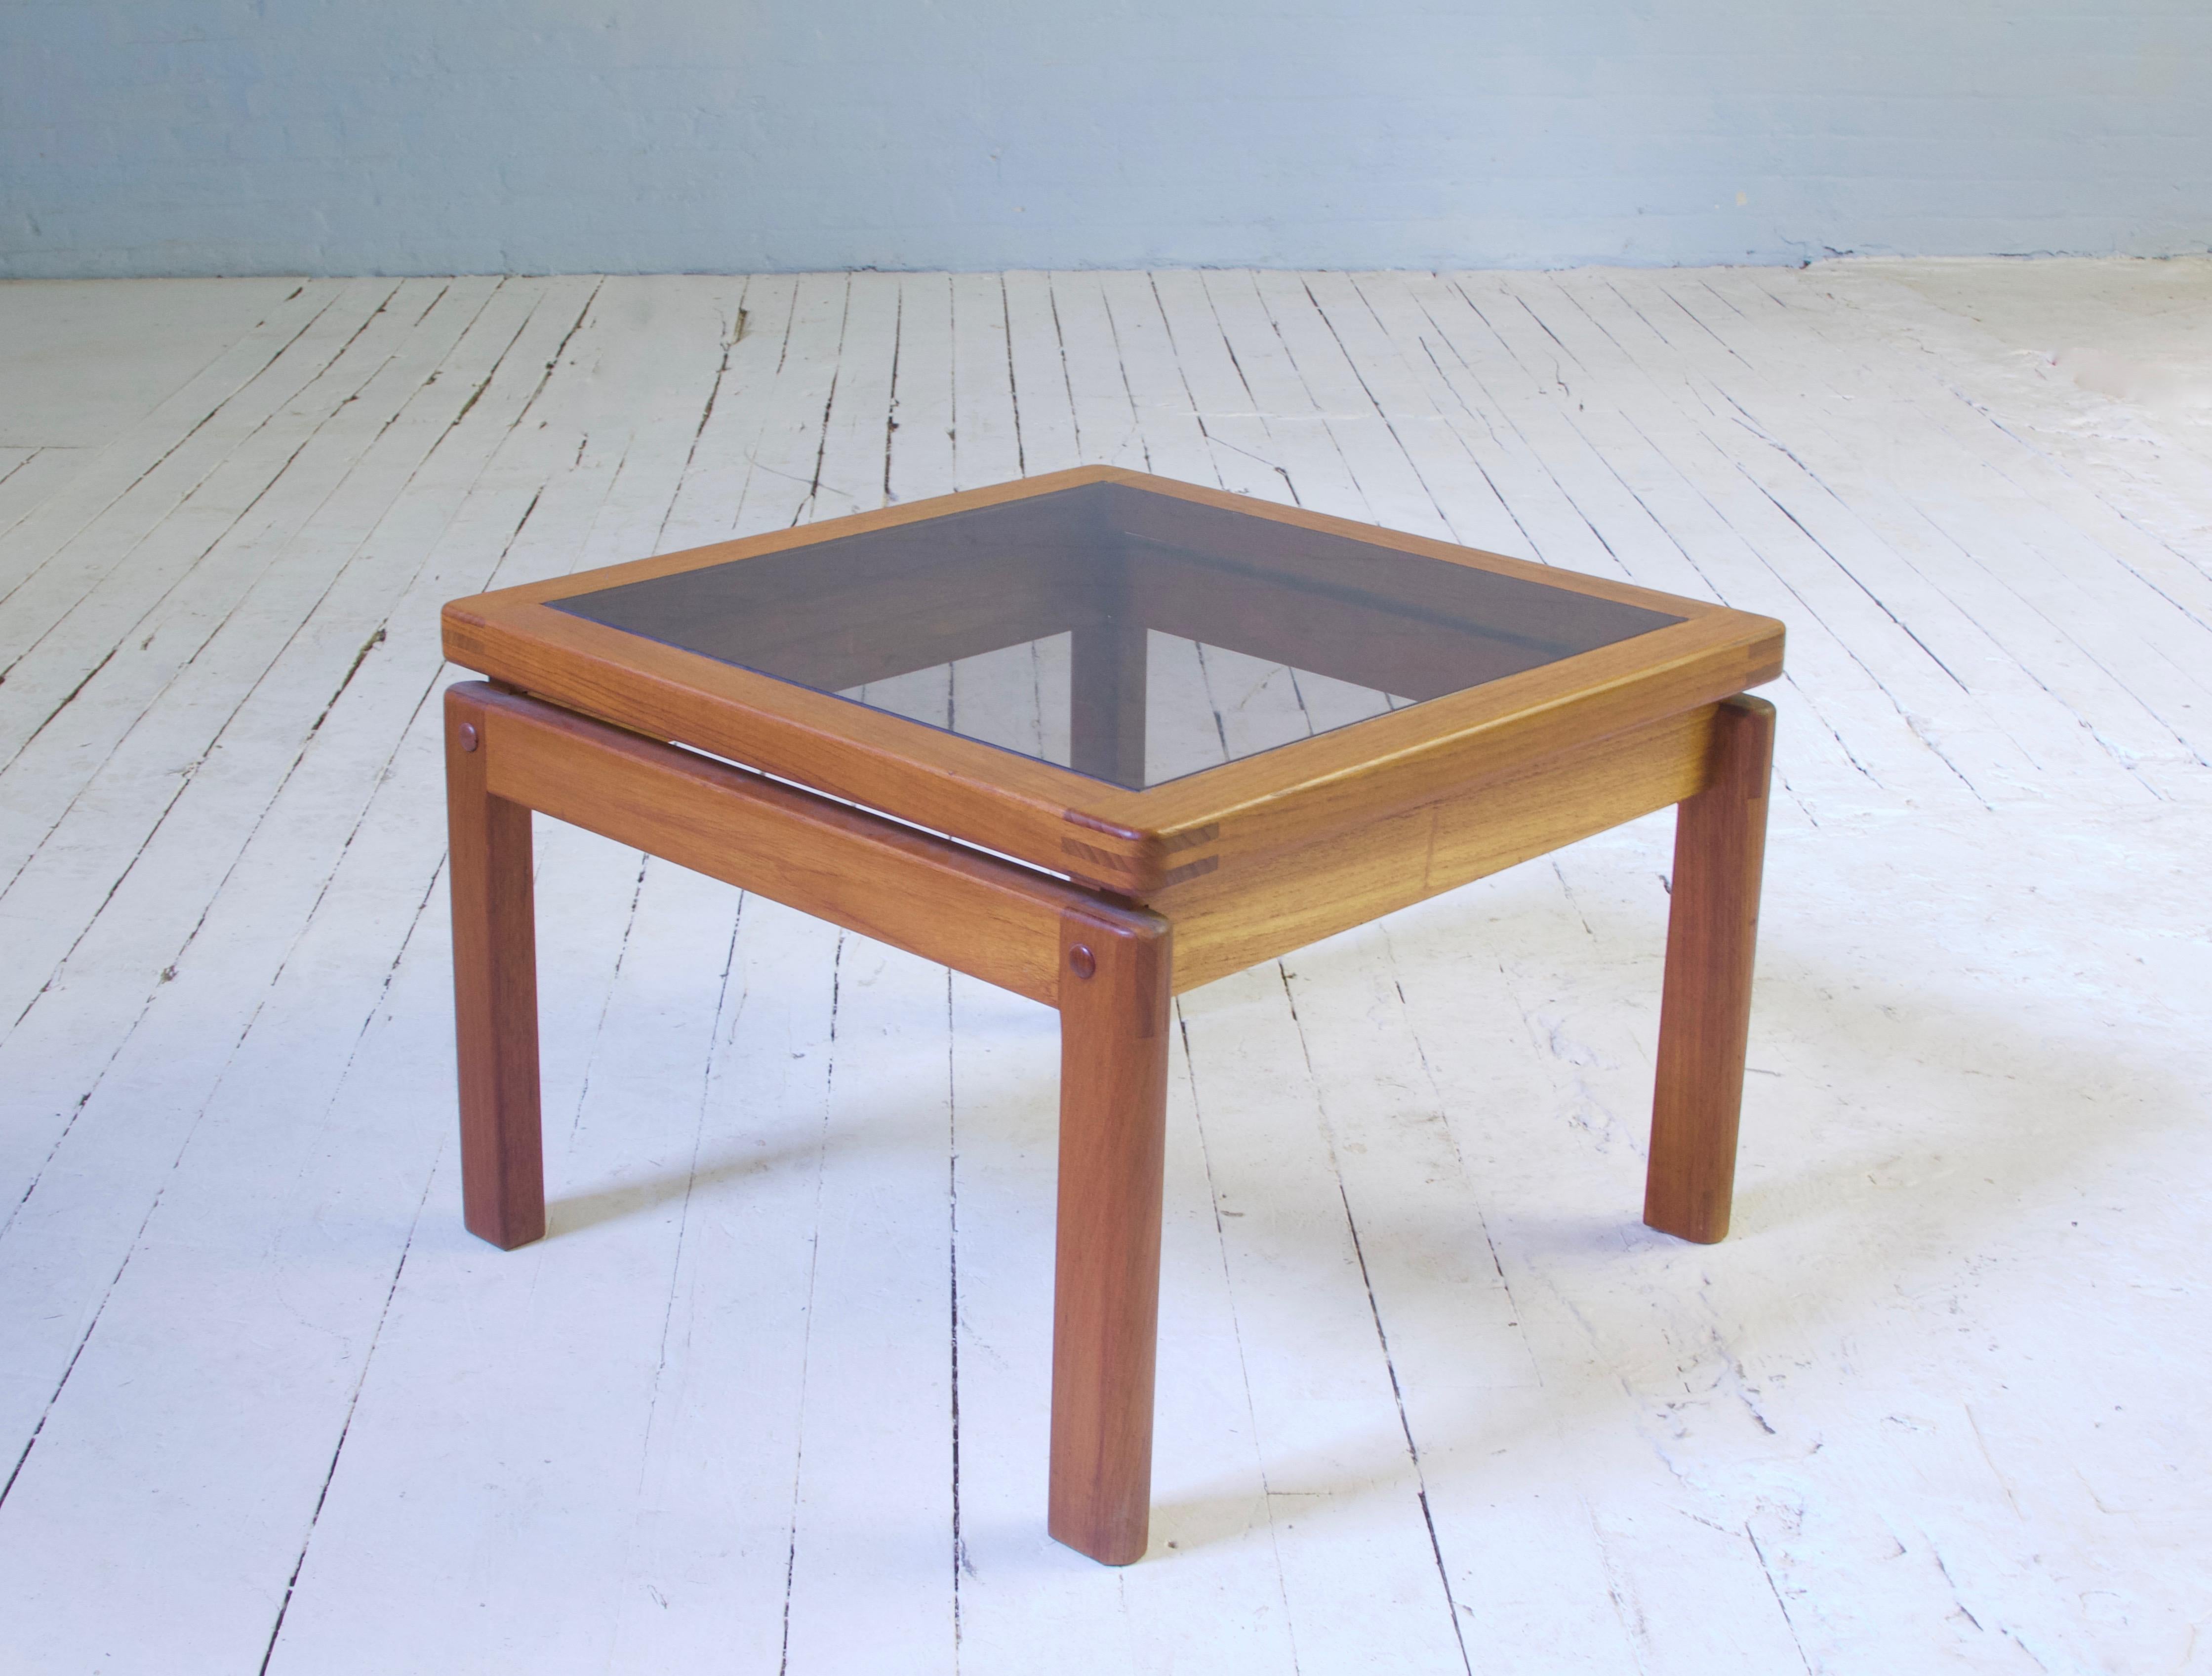 Oiled Vintage Pair of Signed Danish Side Tables with Exposed Joinery in Teak, 1960s For Sale